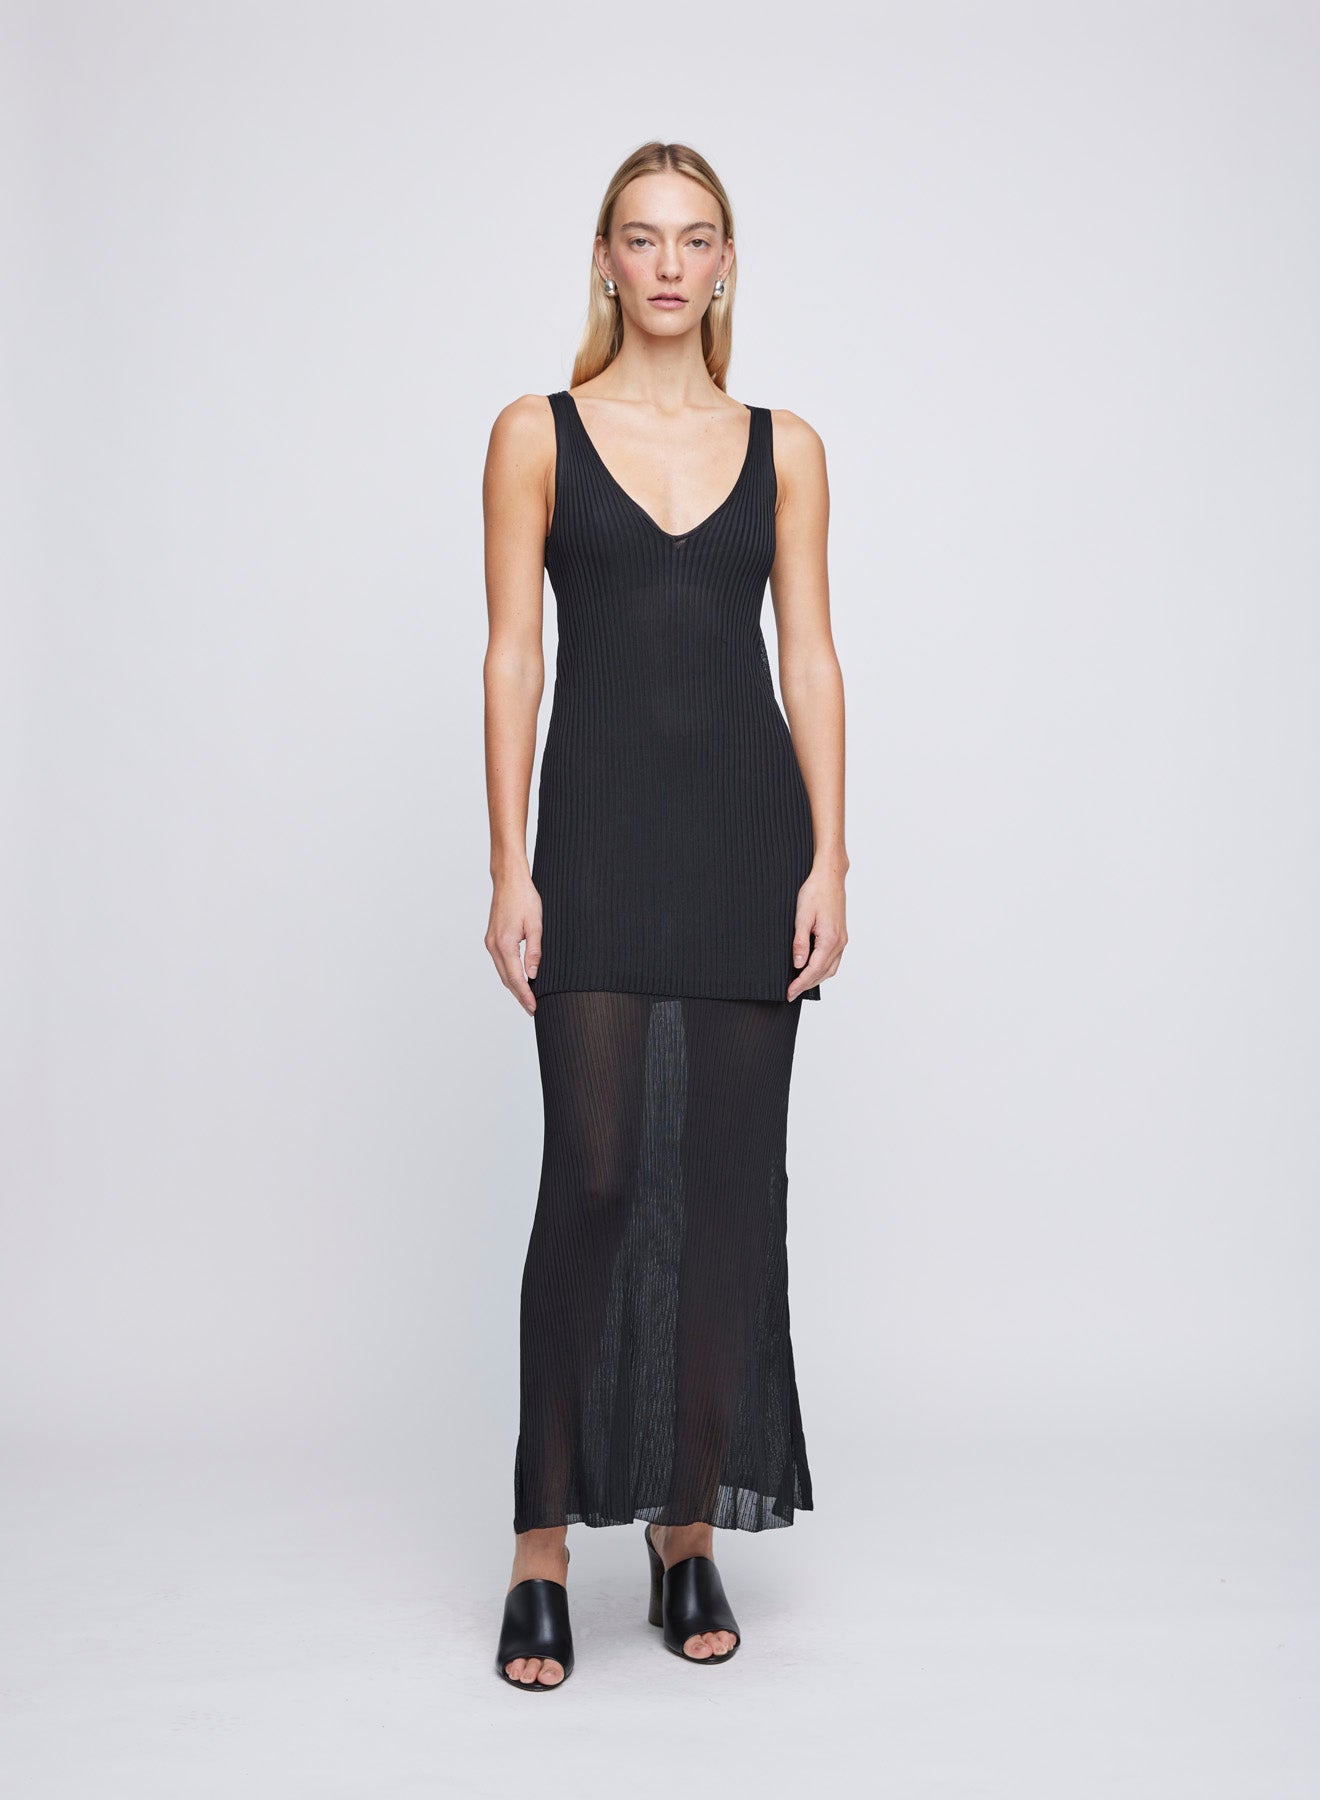 The ANNA QUAN Tilda Dress is a sleeveless sheer knitted midi dress with a deep v neckline and stretch double layering. 